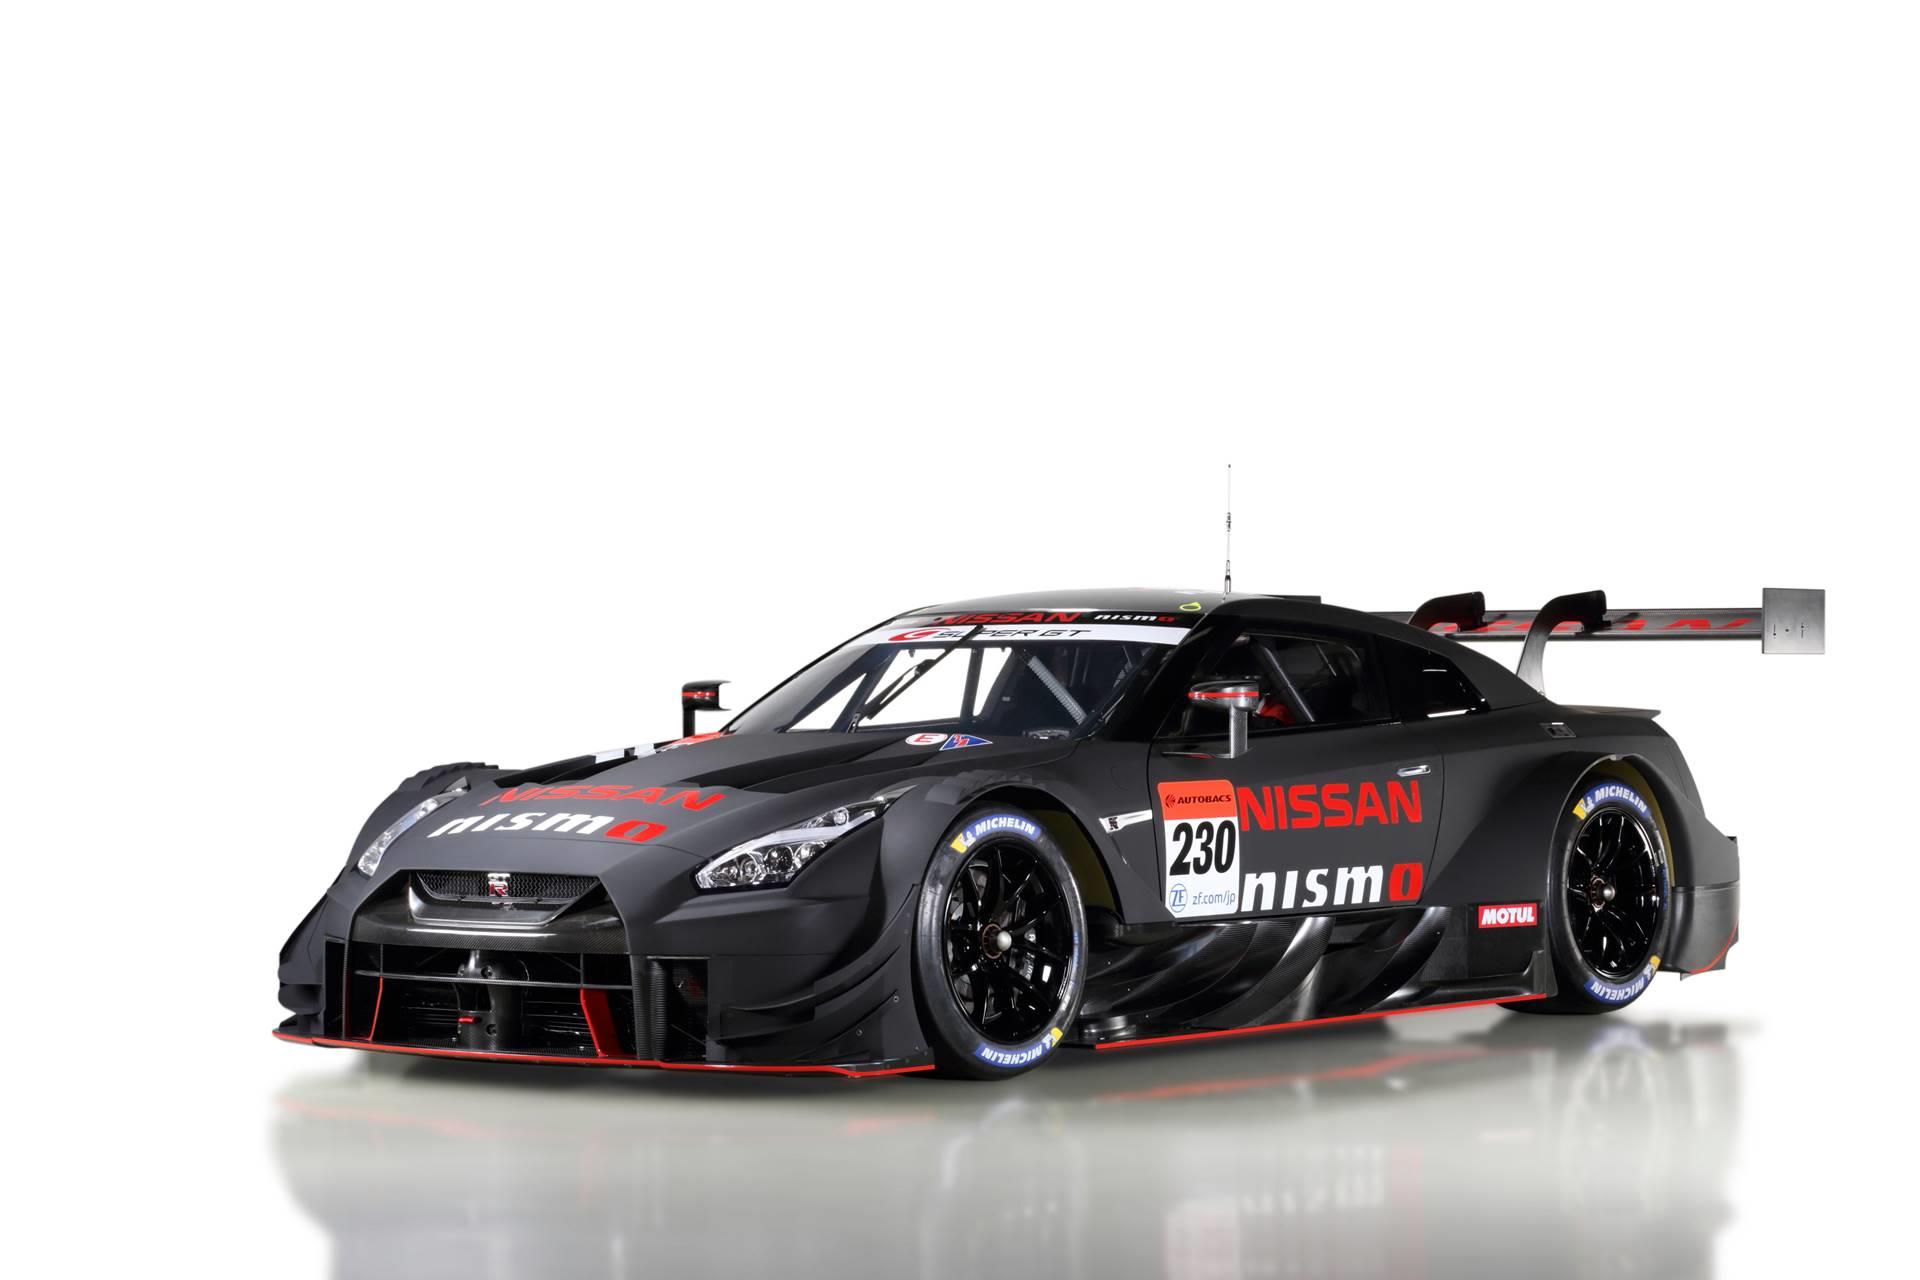 Nissan Gtr Nismo Gt500 News And Information Research And Pricing